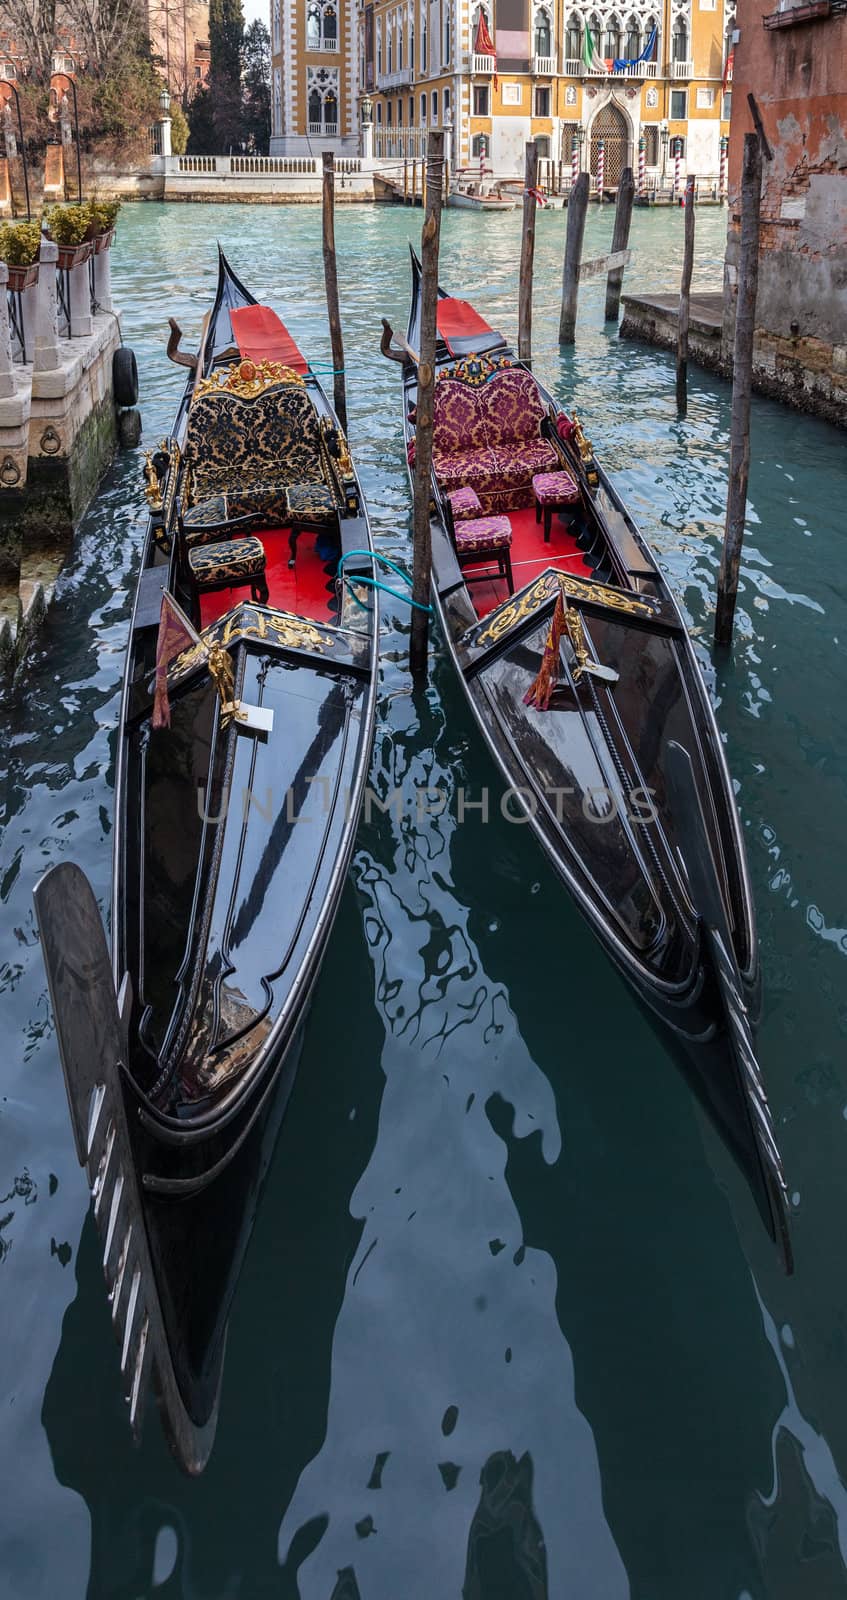 Two gondola on a small canal in Venice Italy.